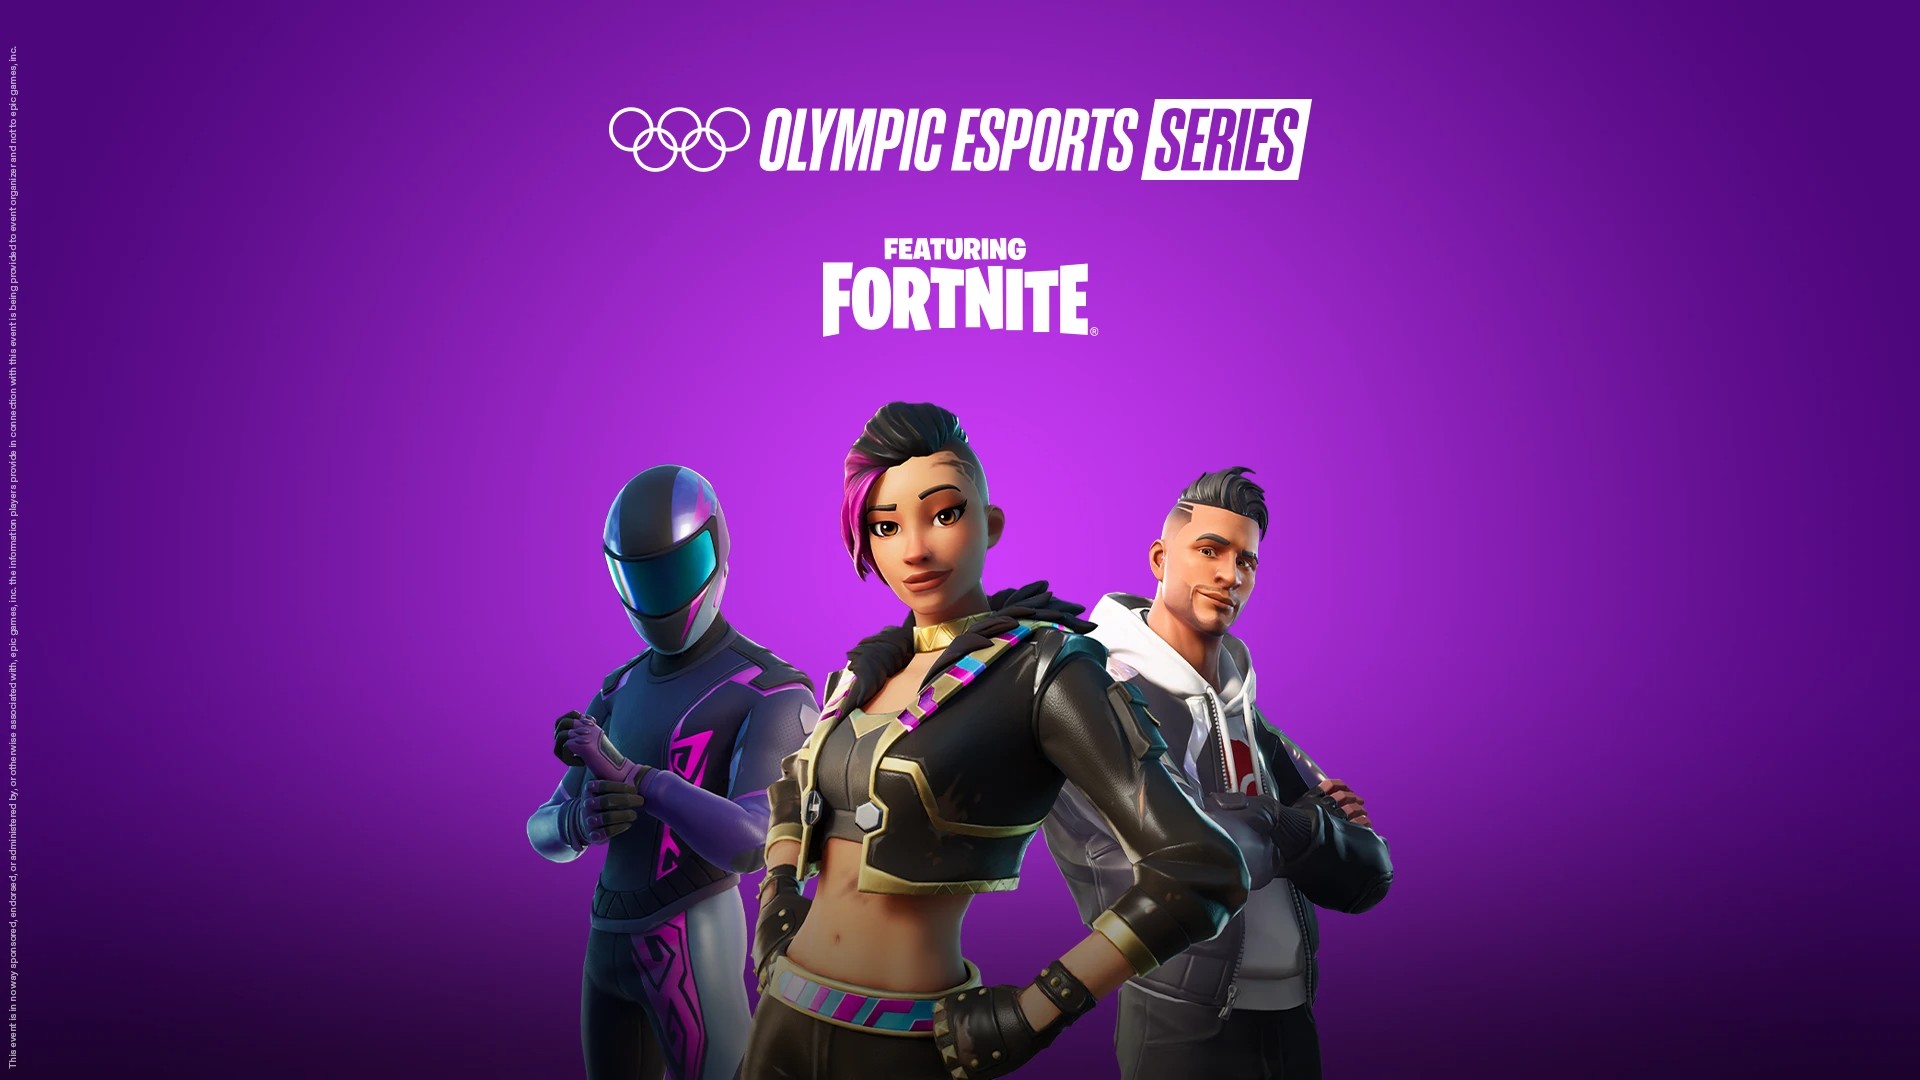 Fortnite is now officially an Olympic esport